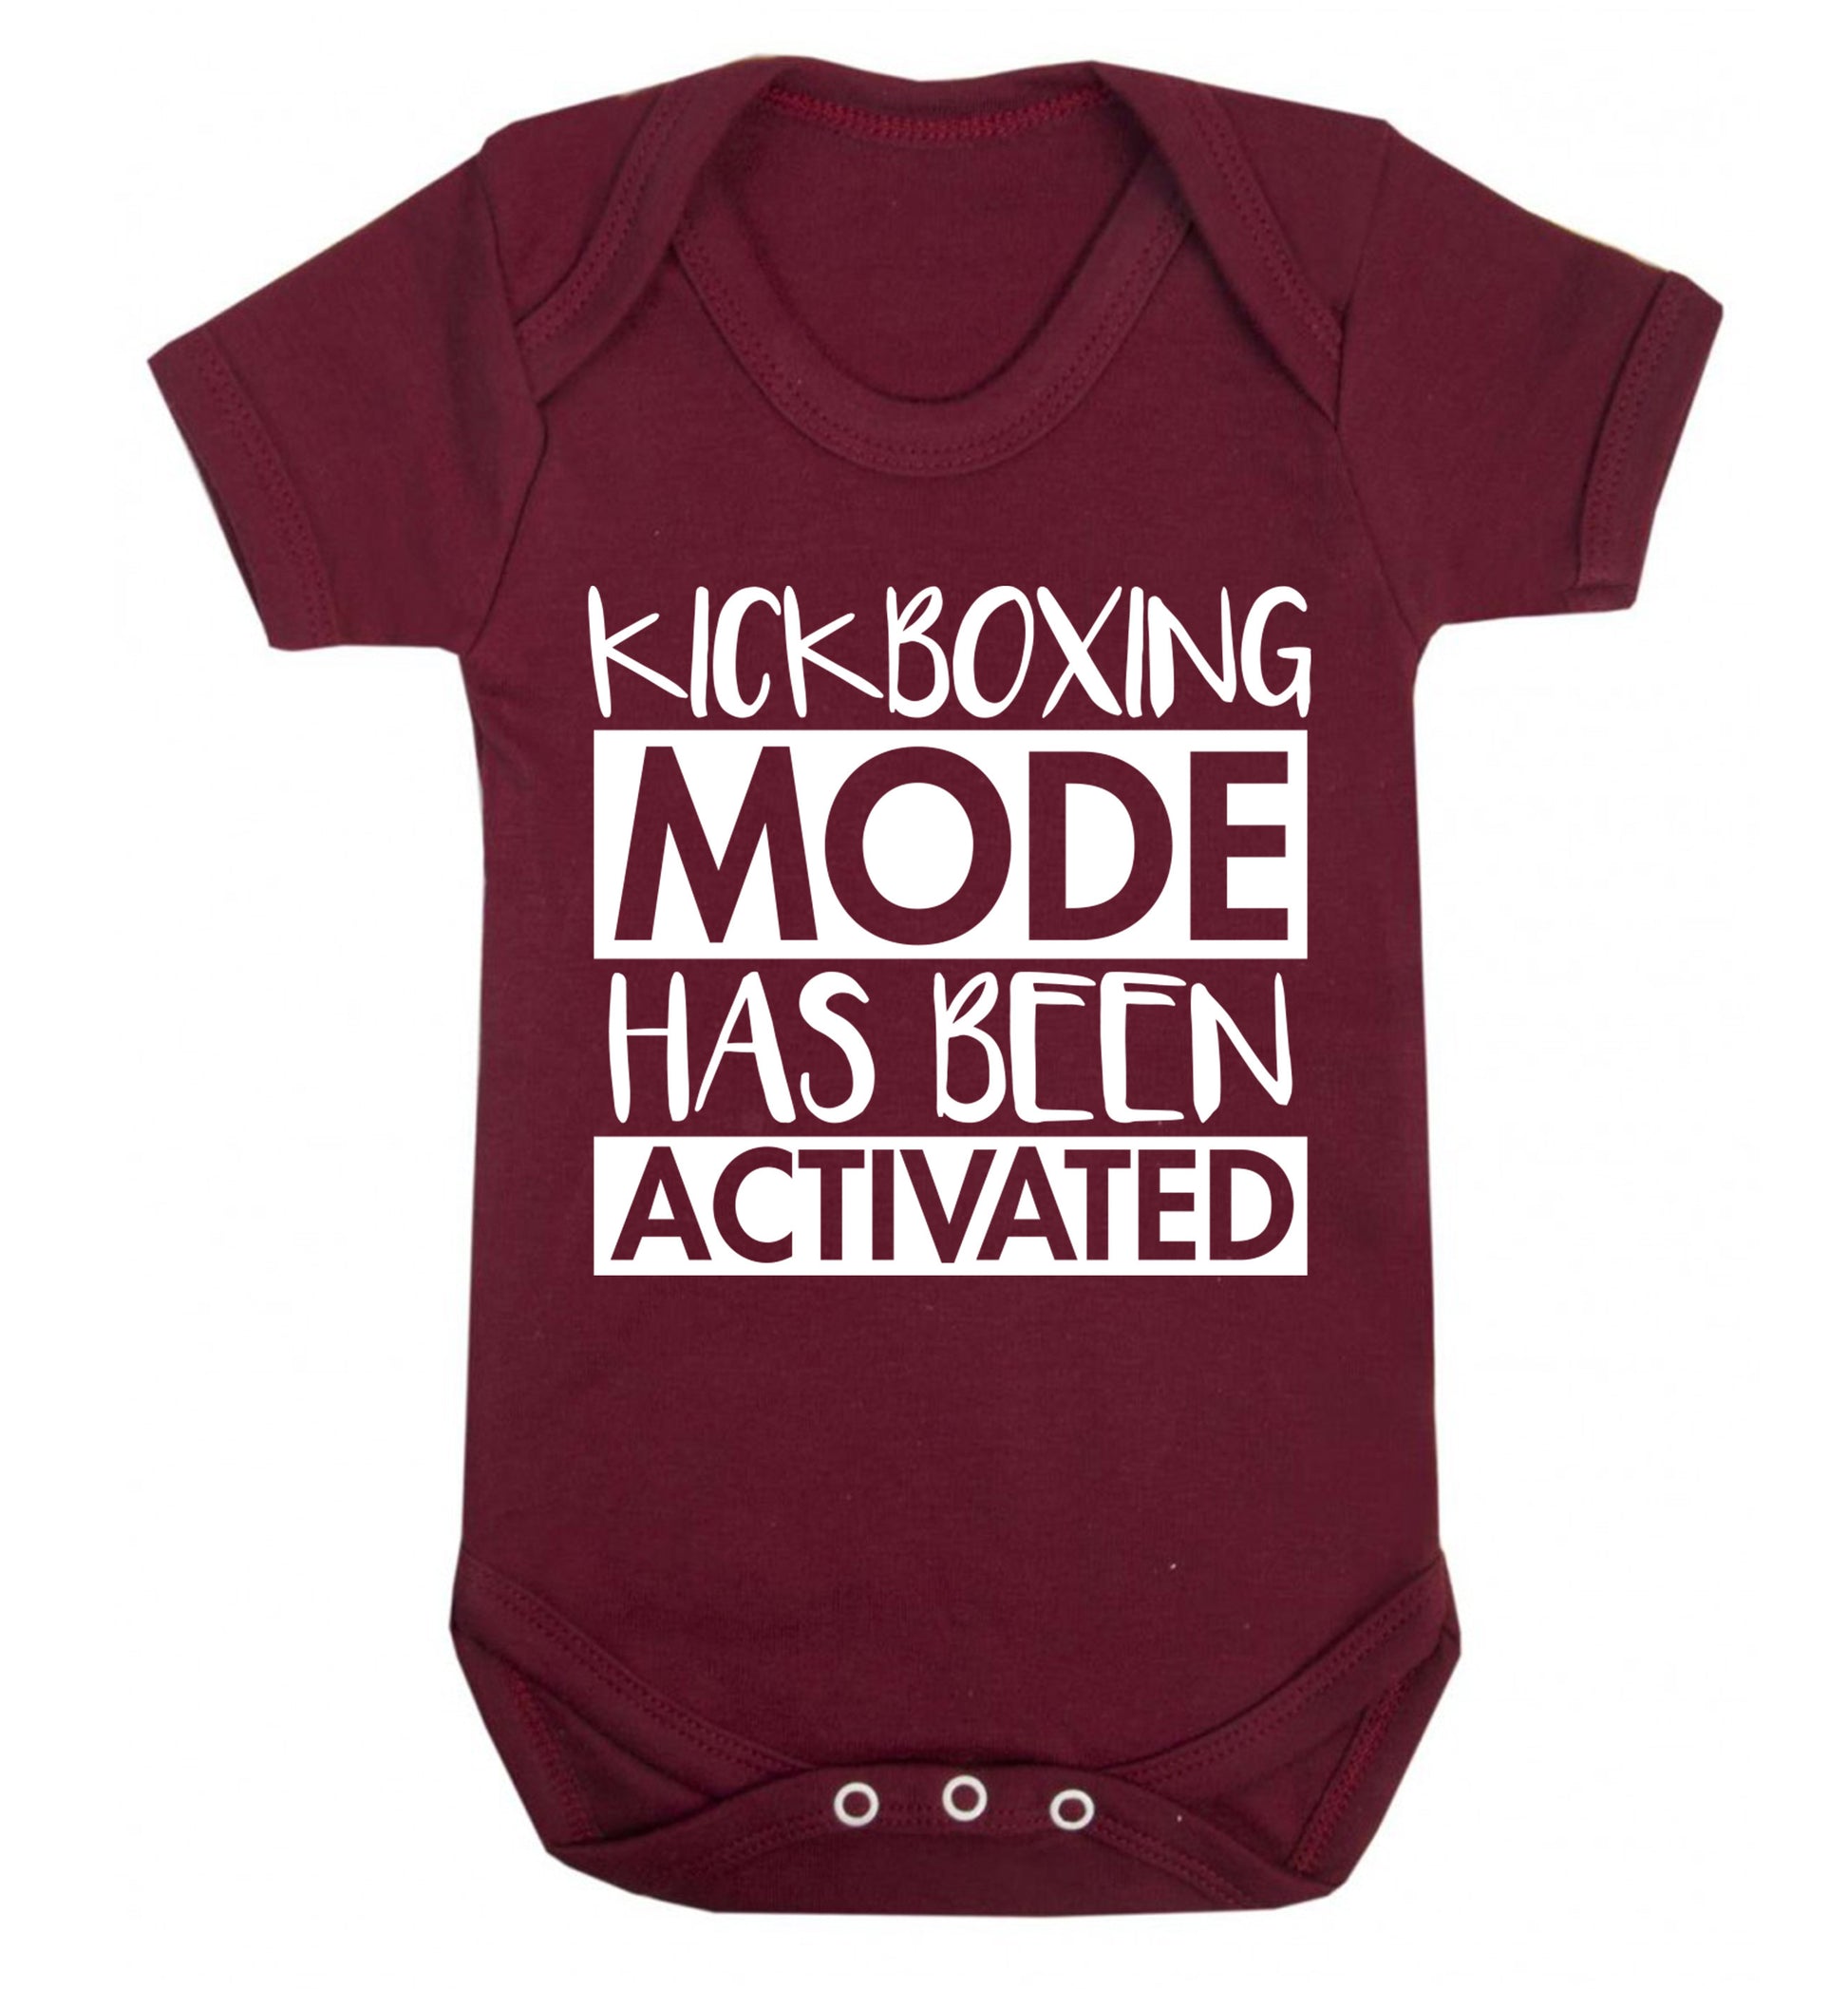 Kickboxing mode activated Baby Vest maroon 18-24 months